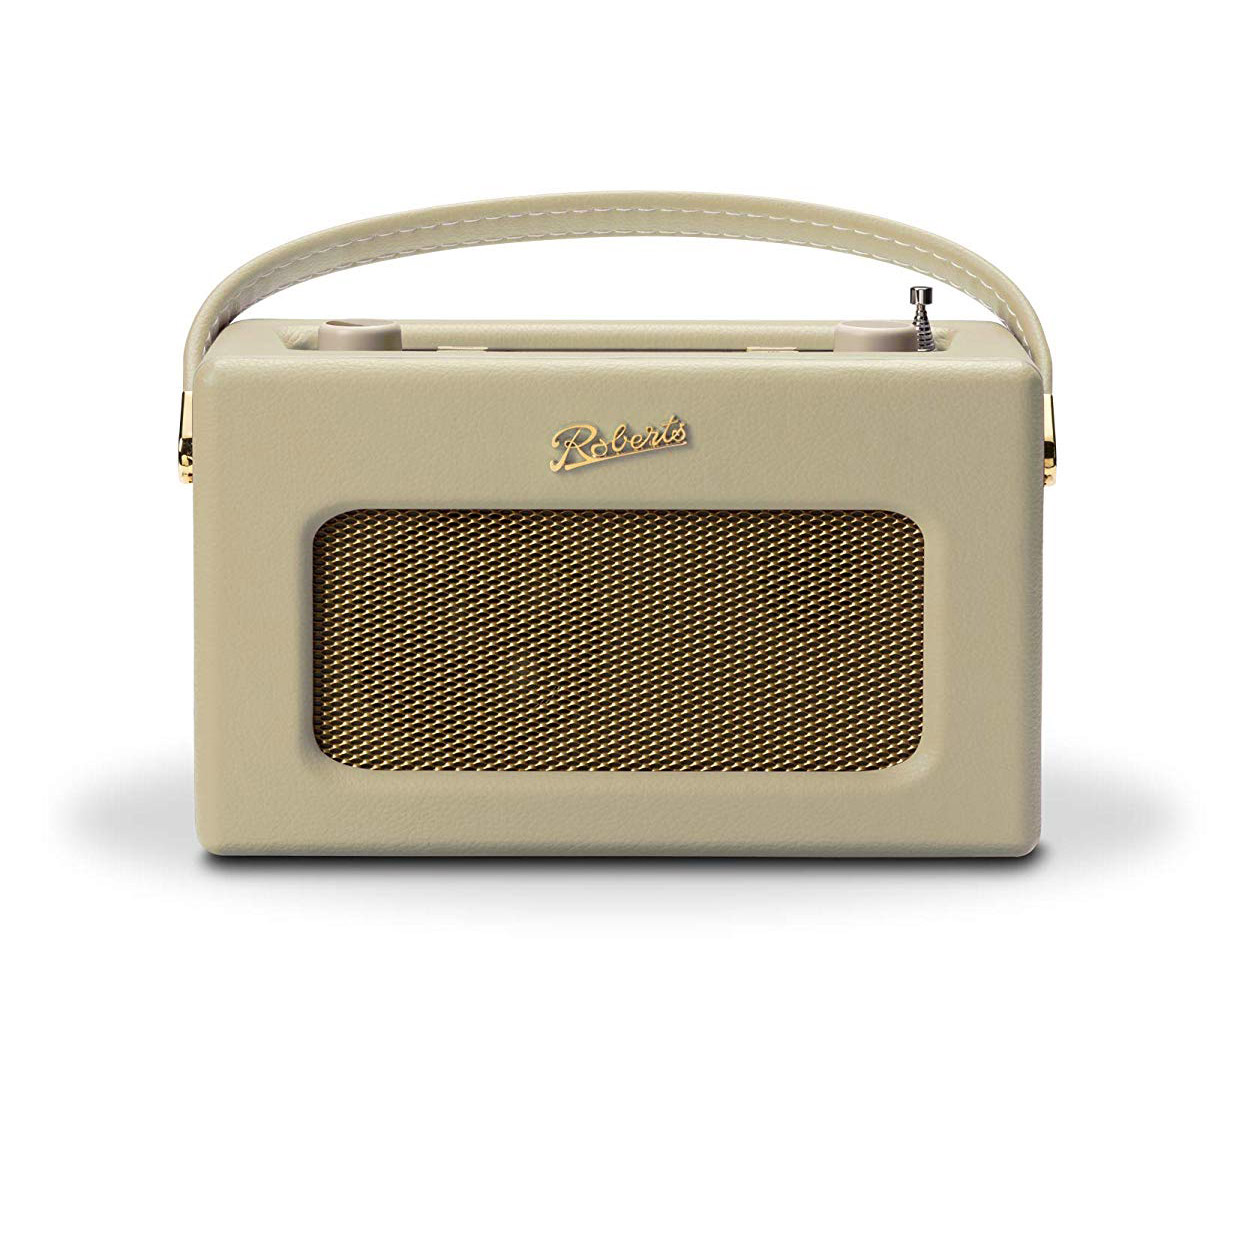 Roberts ISTREAMLPC Revival Smart DAB FM Radio with Alexa in Pastel Cre